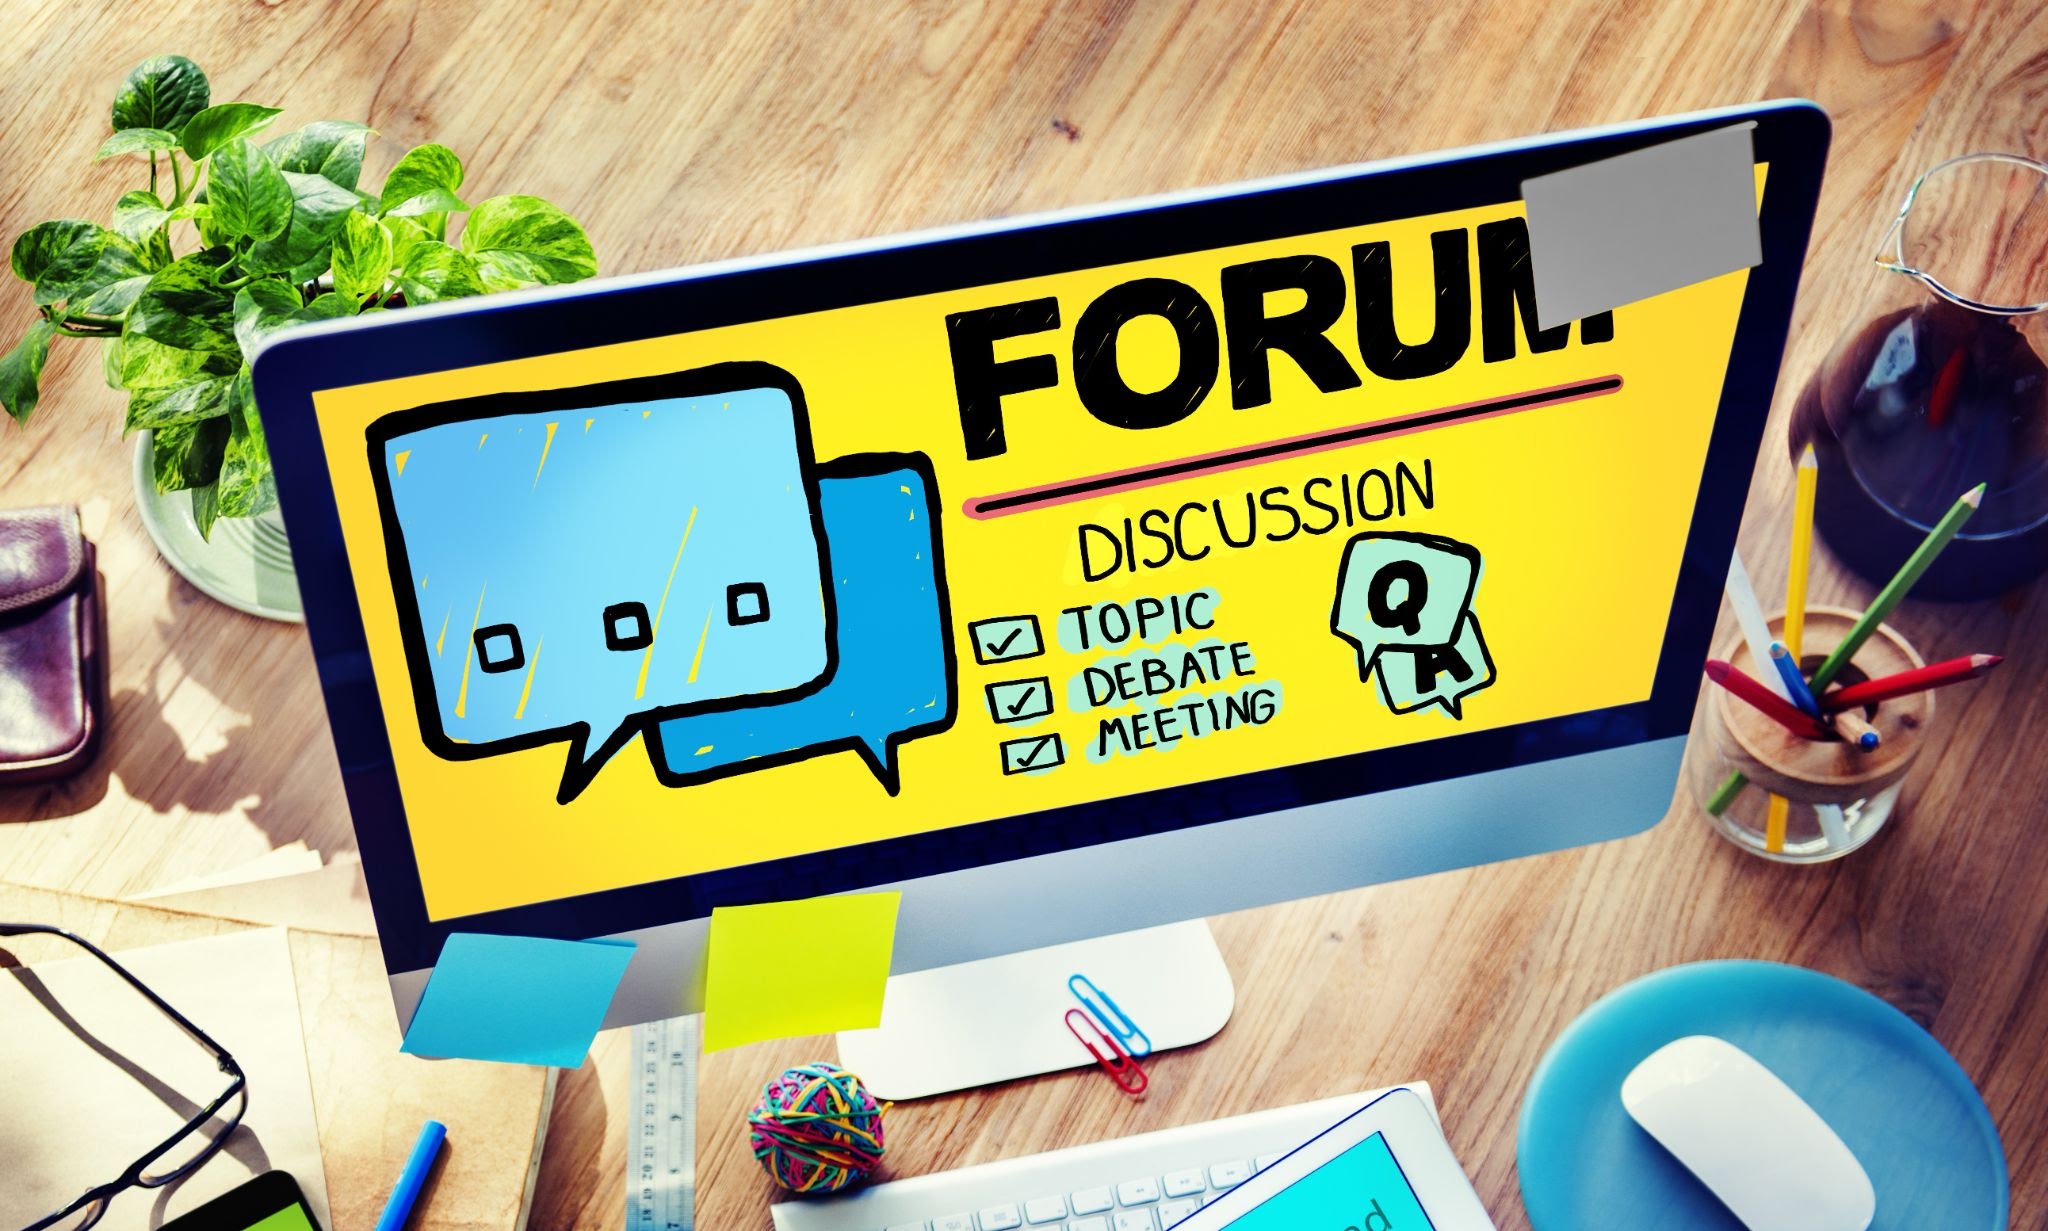 Discussion forums are a great way to engage your members